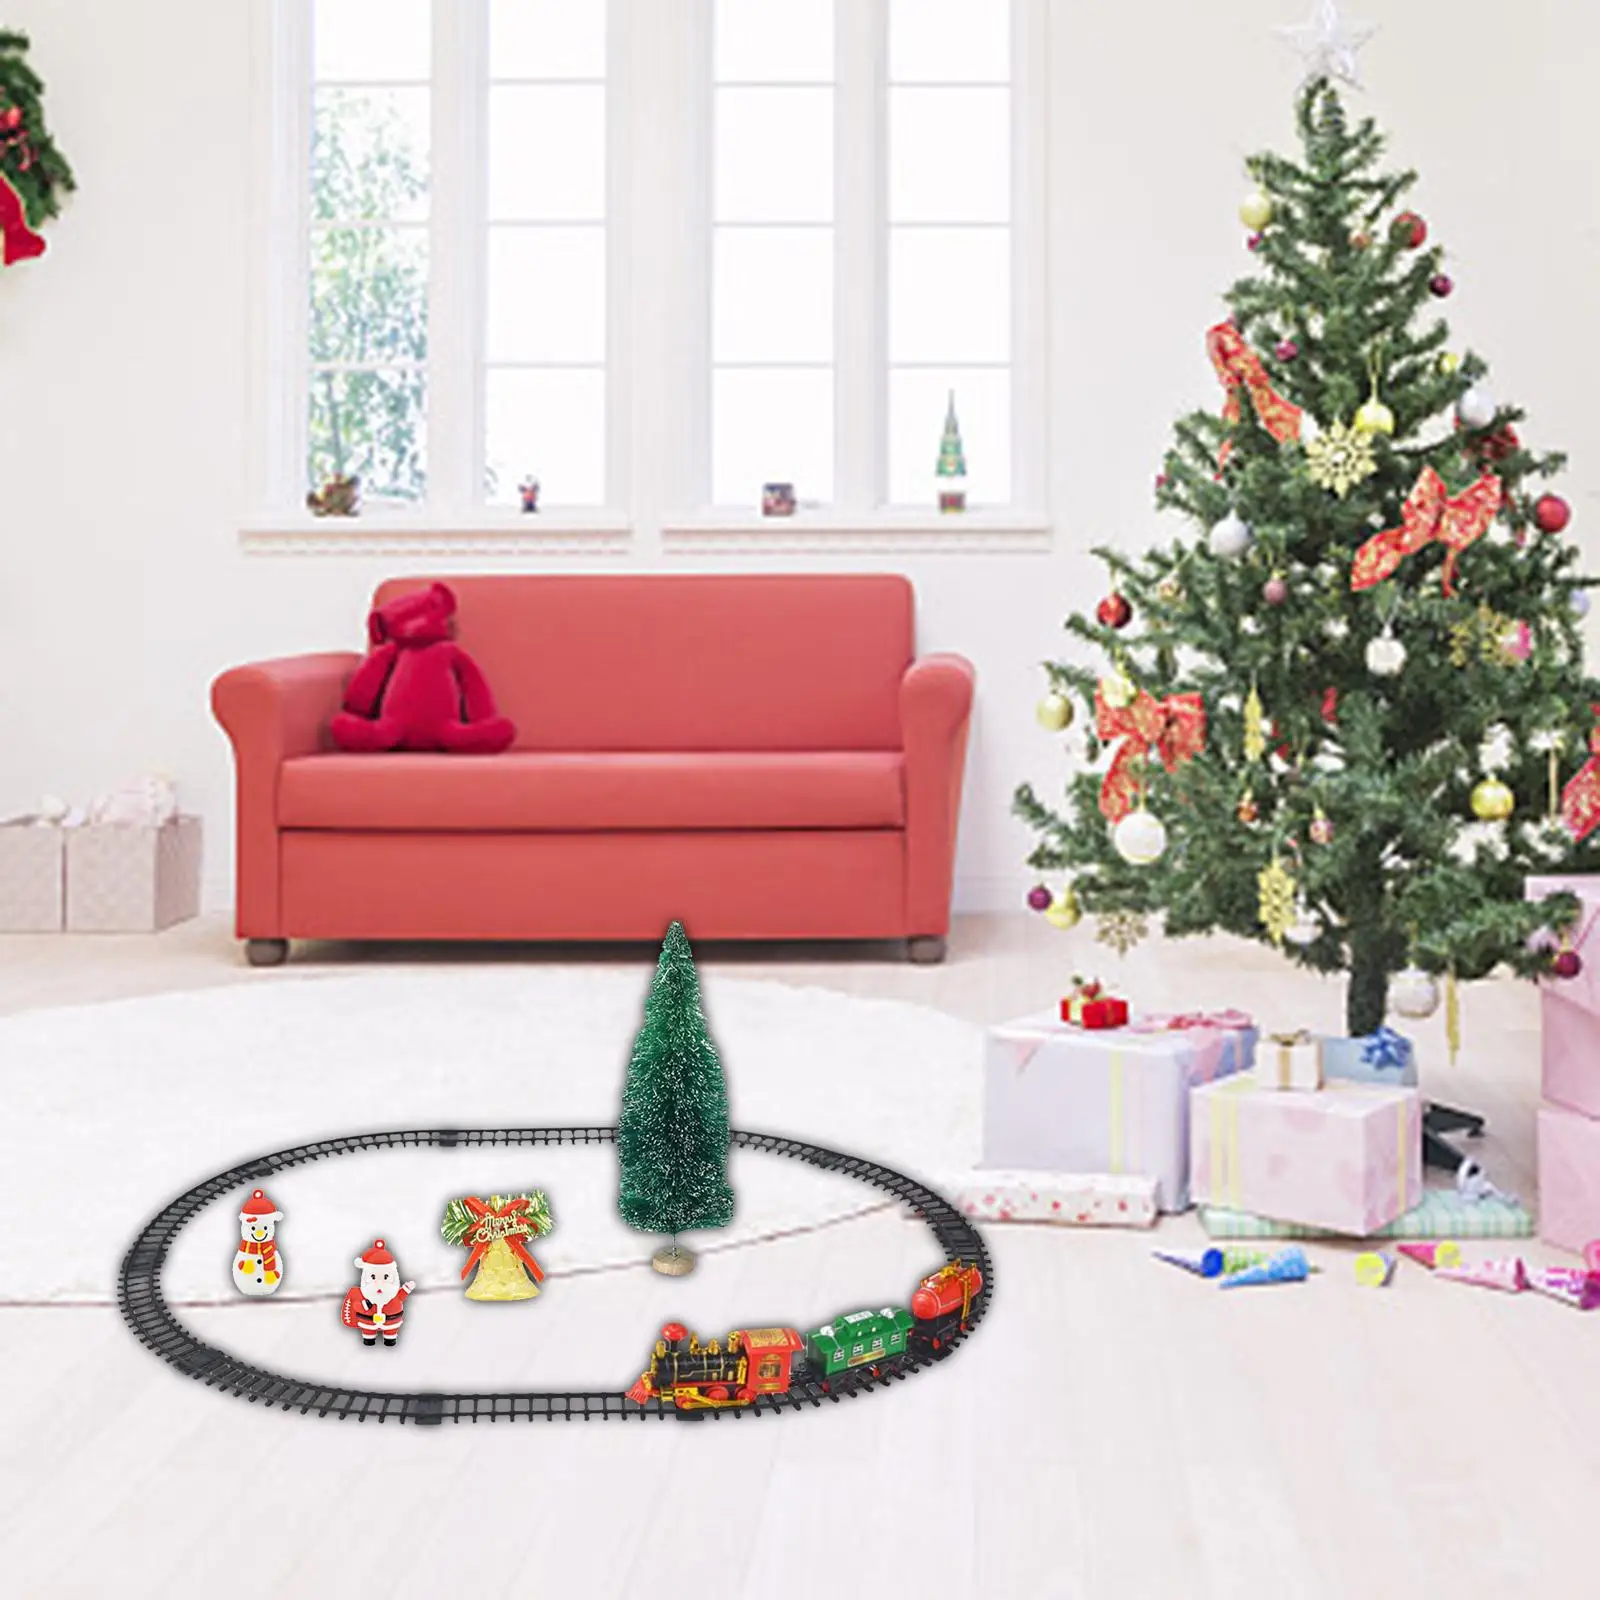 Portable Train Set Educational Learning Toy Railway Tracks Toy for Toddlers